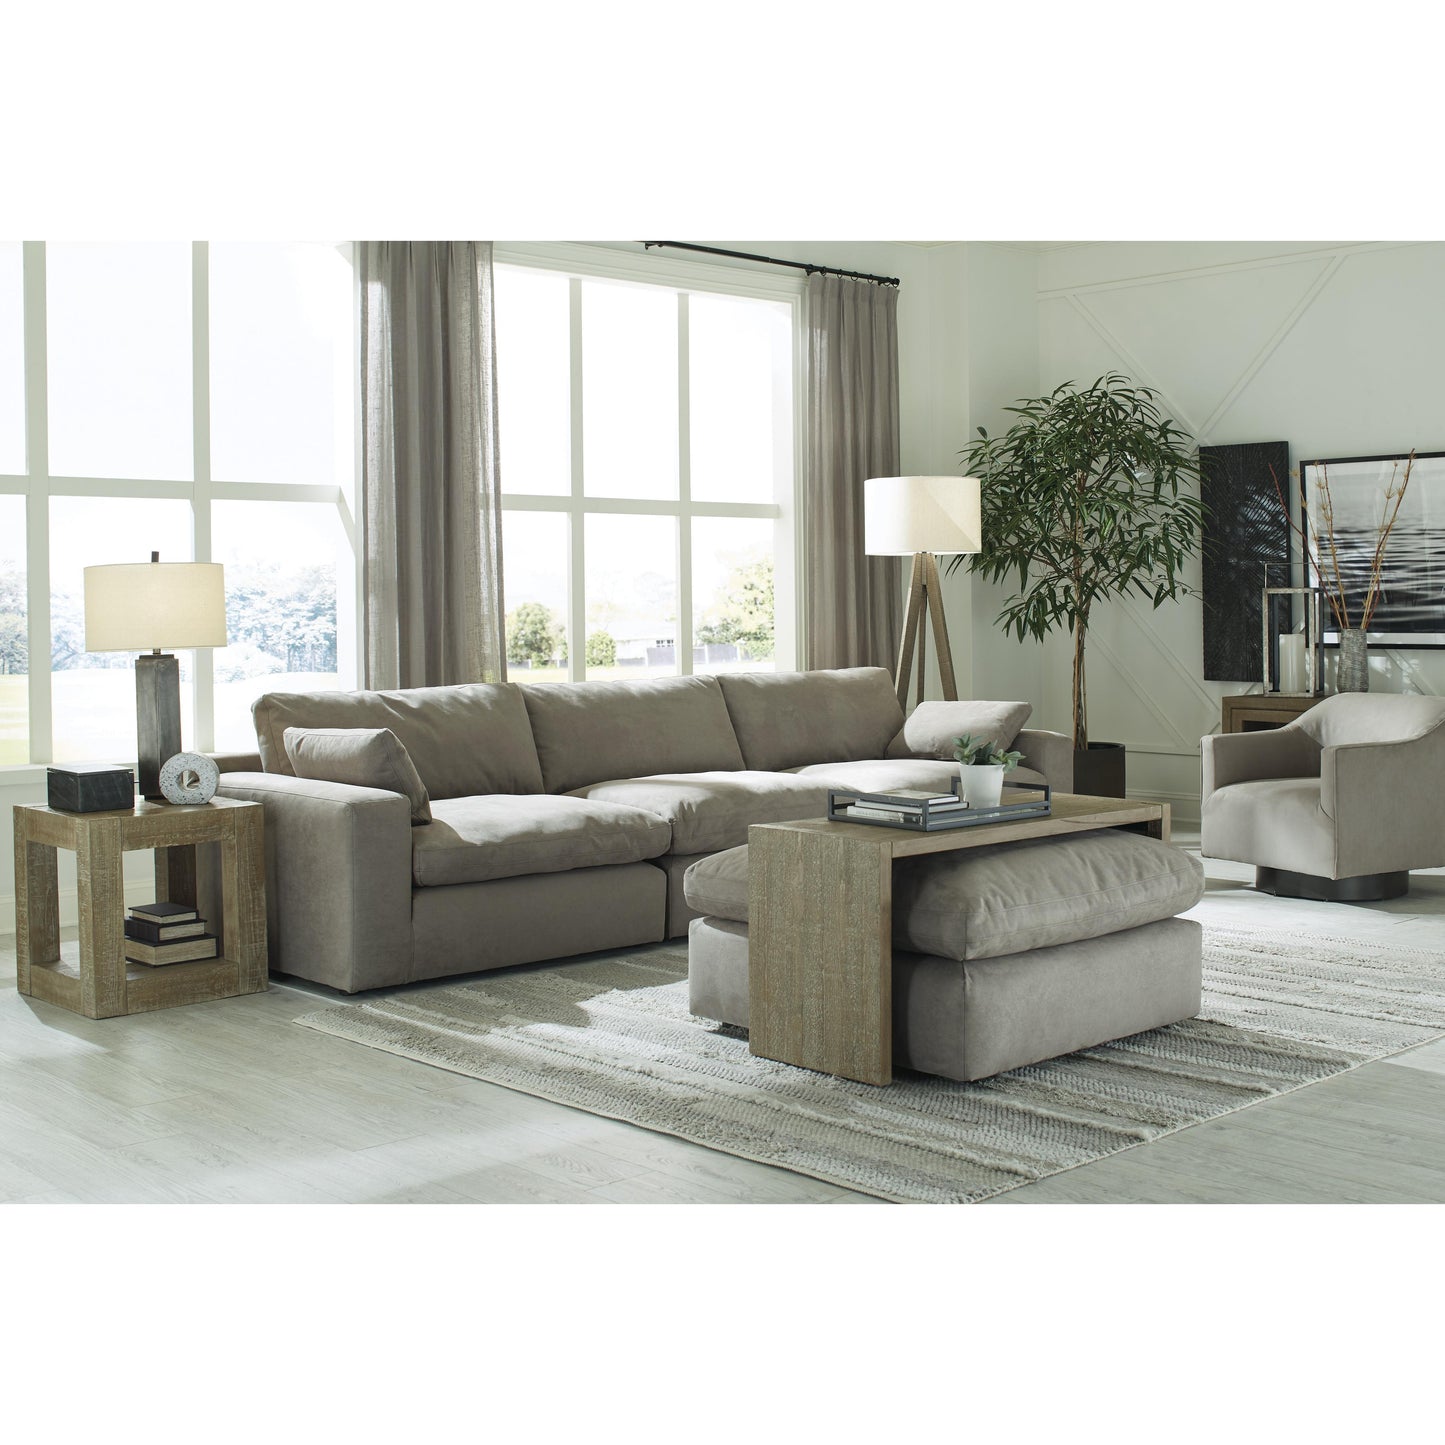 Signature Design by Ashley Next-Gen Gaucho Leather Look 3 pc Sectional 1540364/1540346/1540365 IMAGE 2